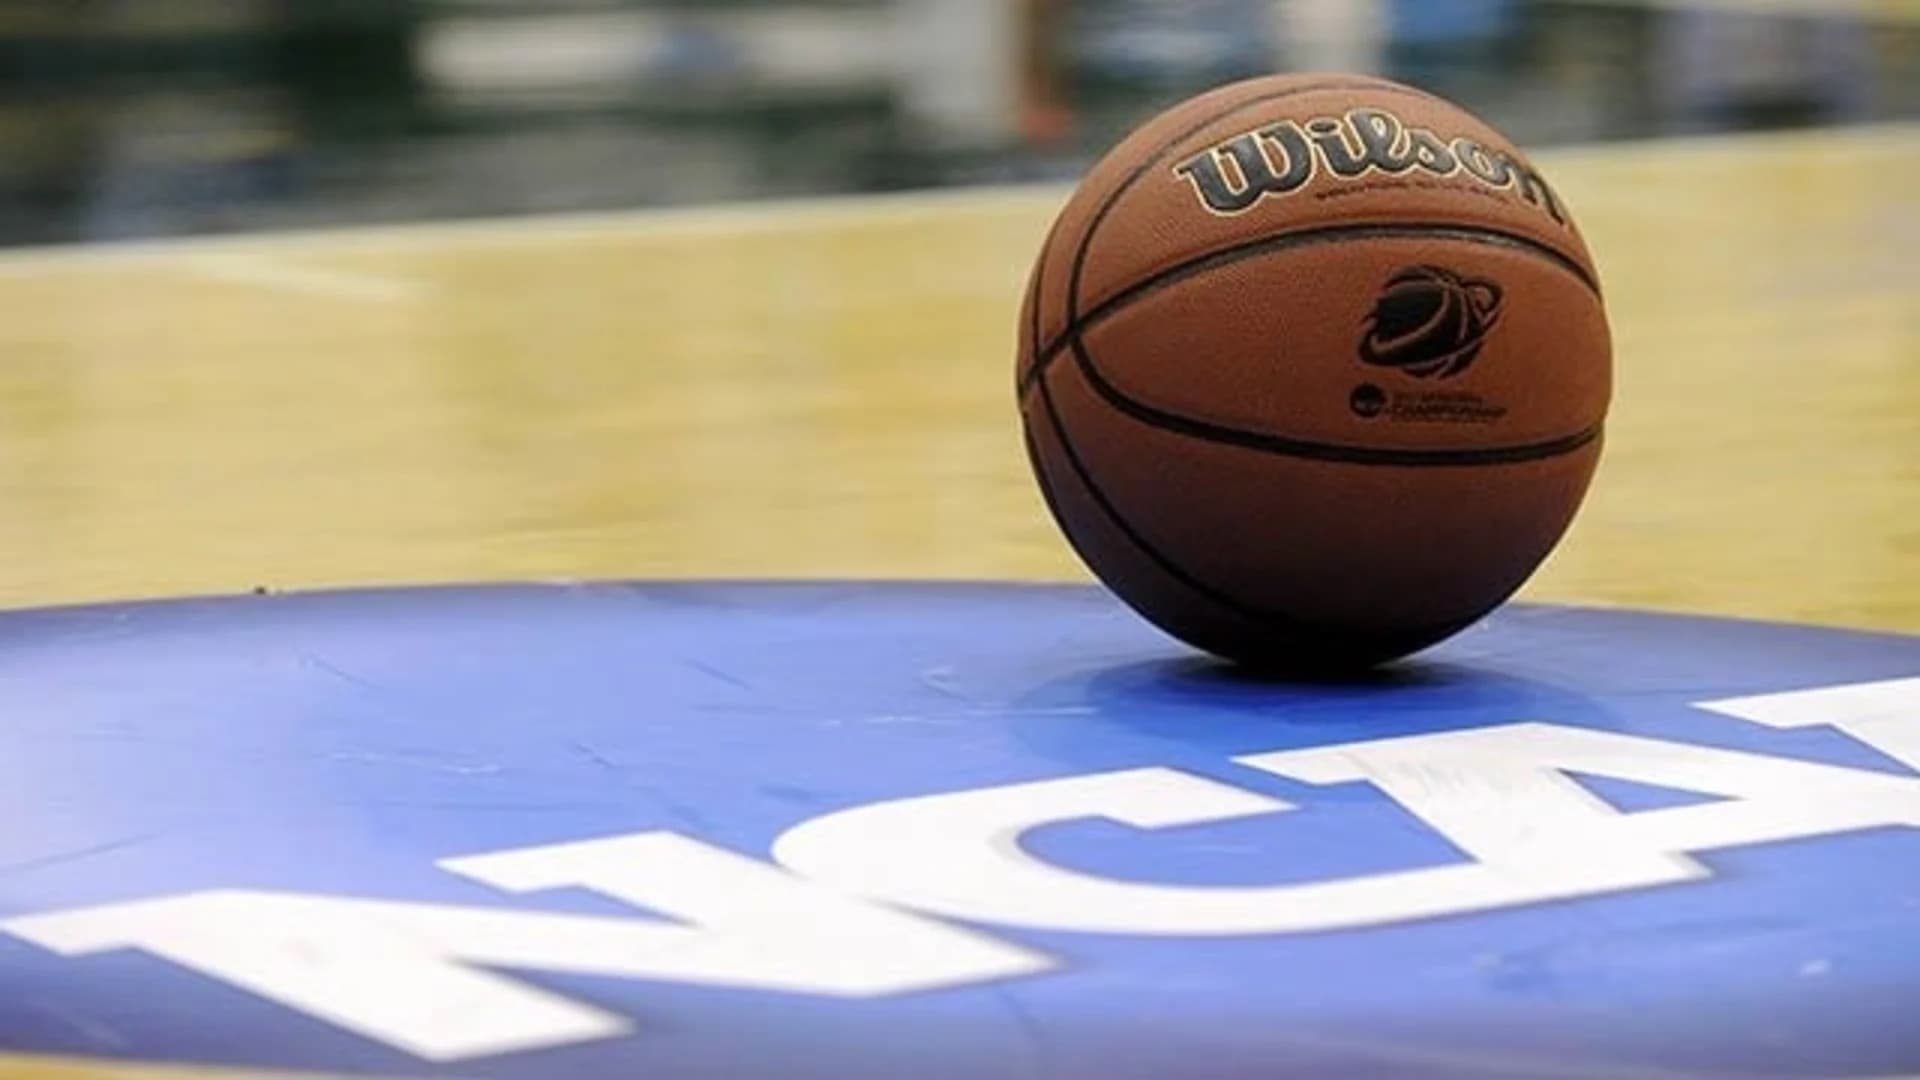 NCAA coaches among 10 charged with fraud and corruption